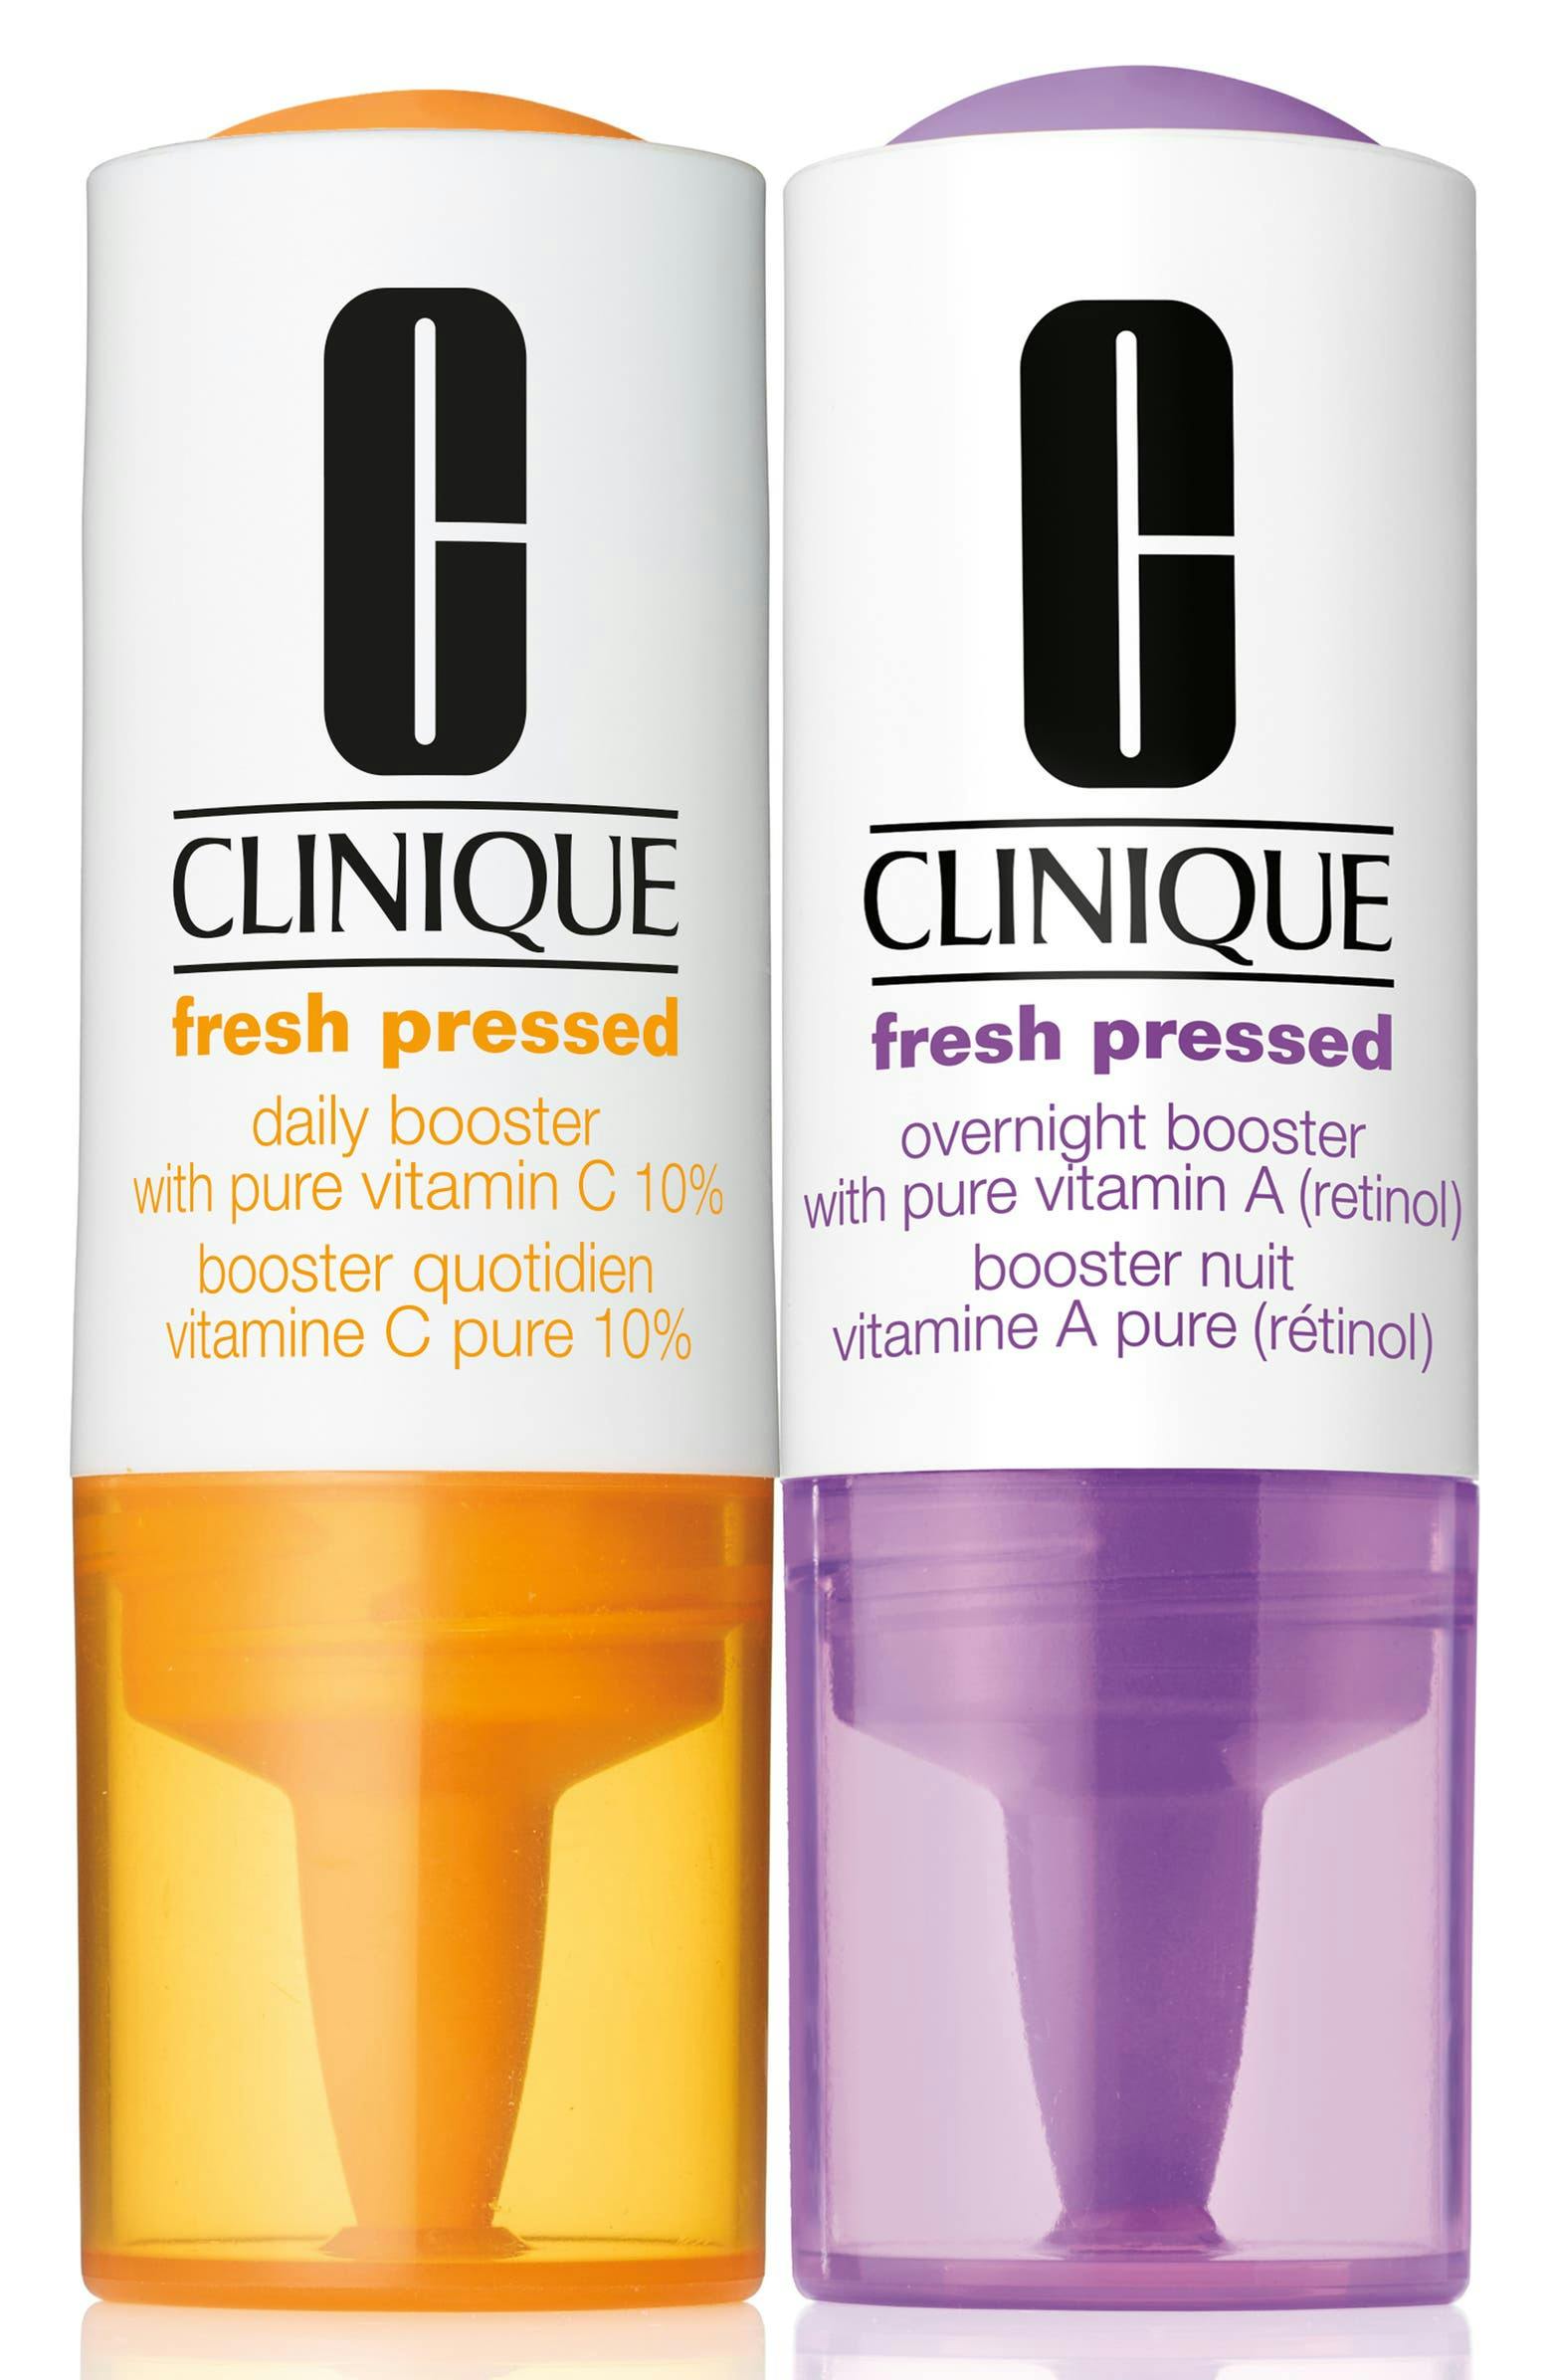 Clinique vitamin c serum best beauty gifts